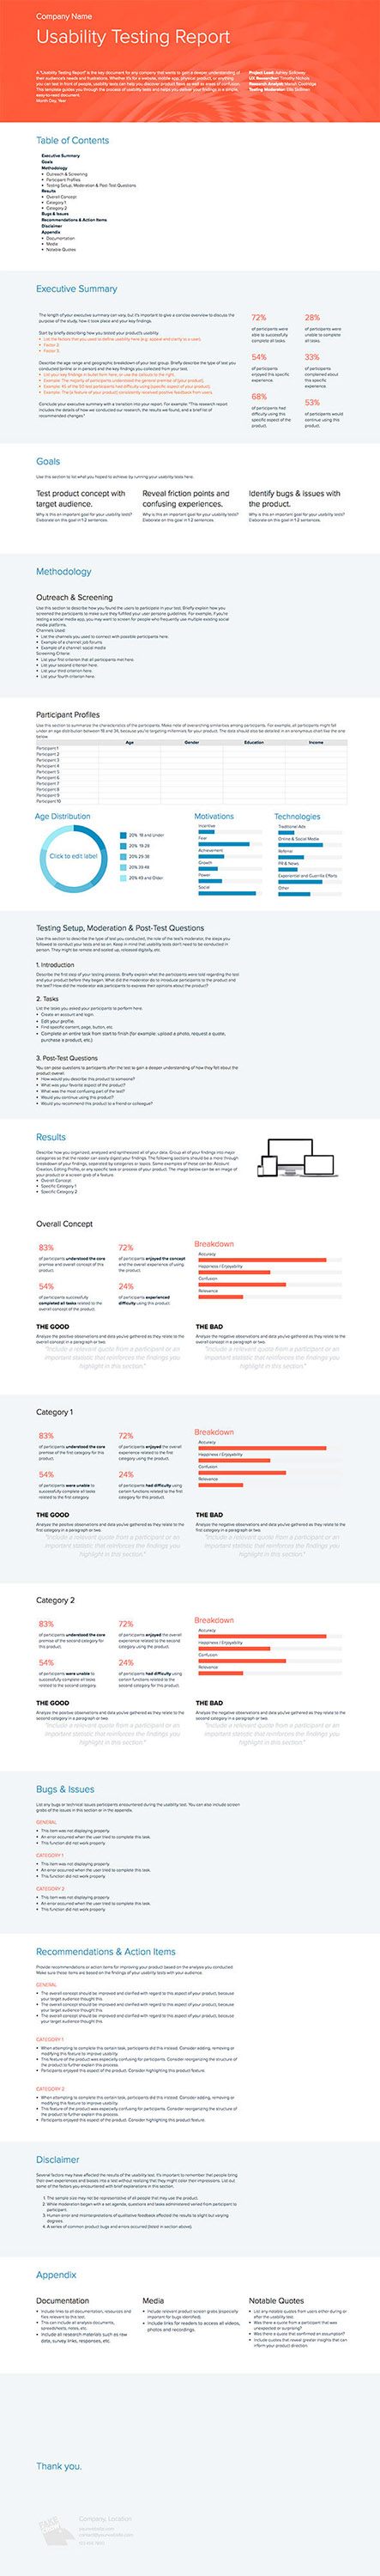 How To Write A Usability Testing Report (With Samples Regarding Usability Test Report Template